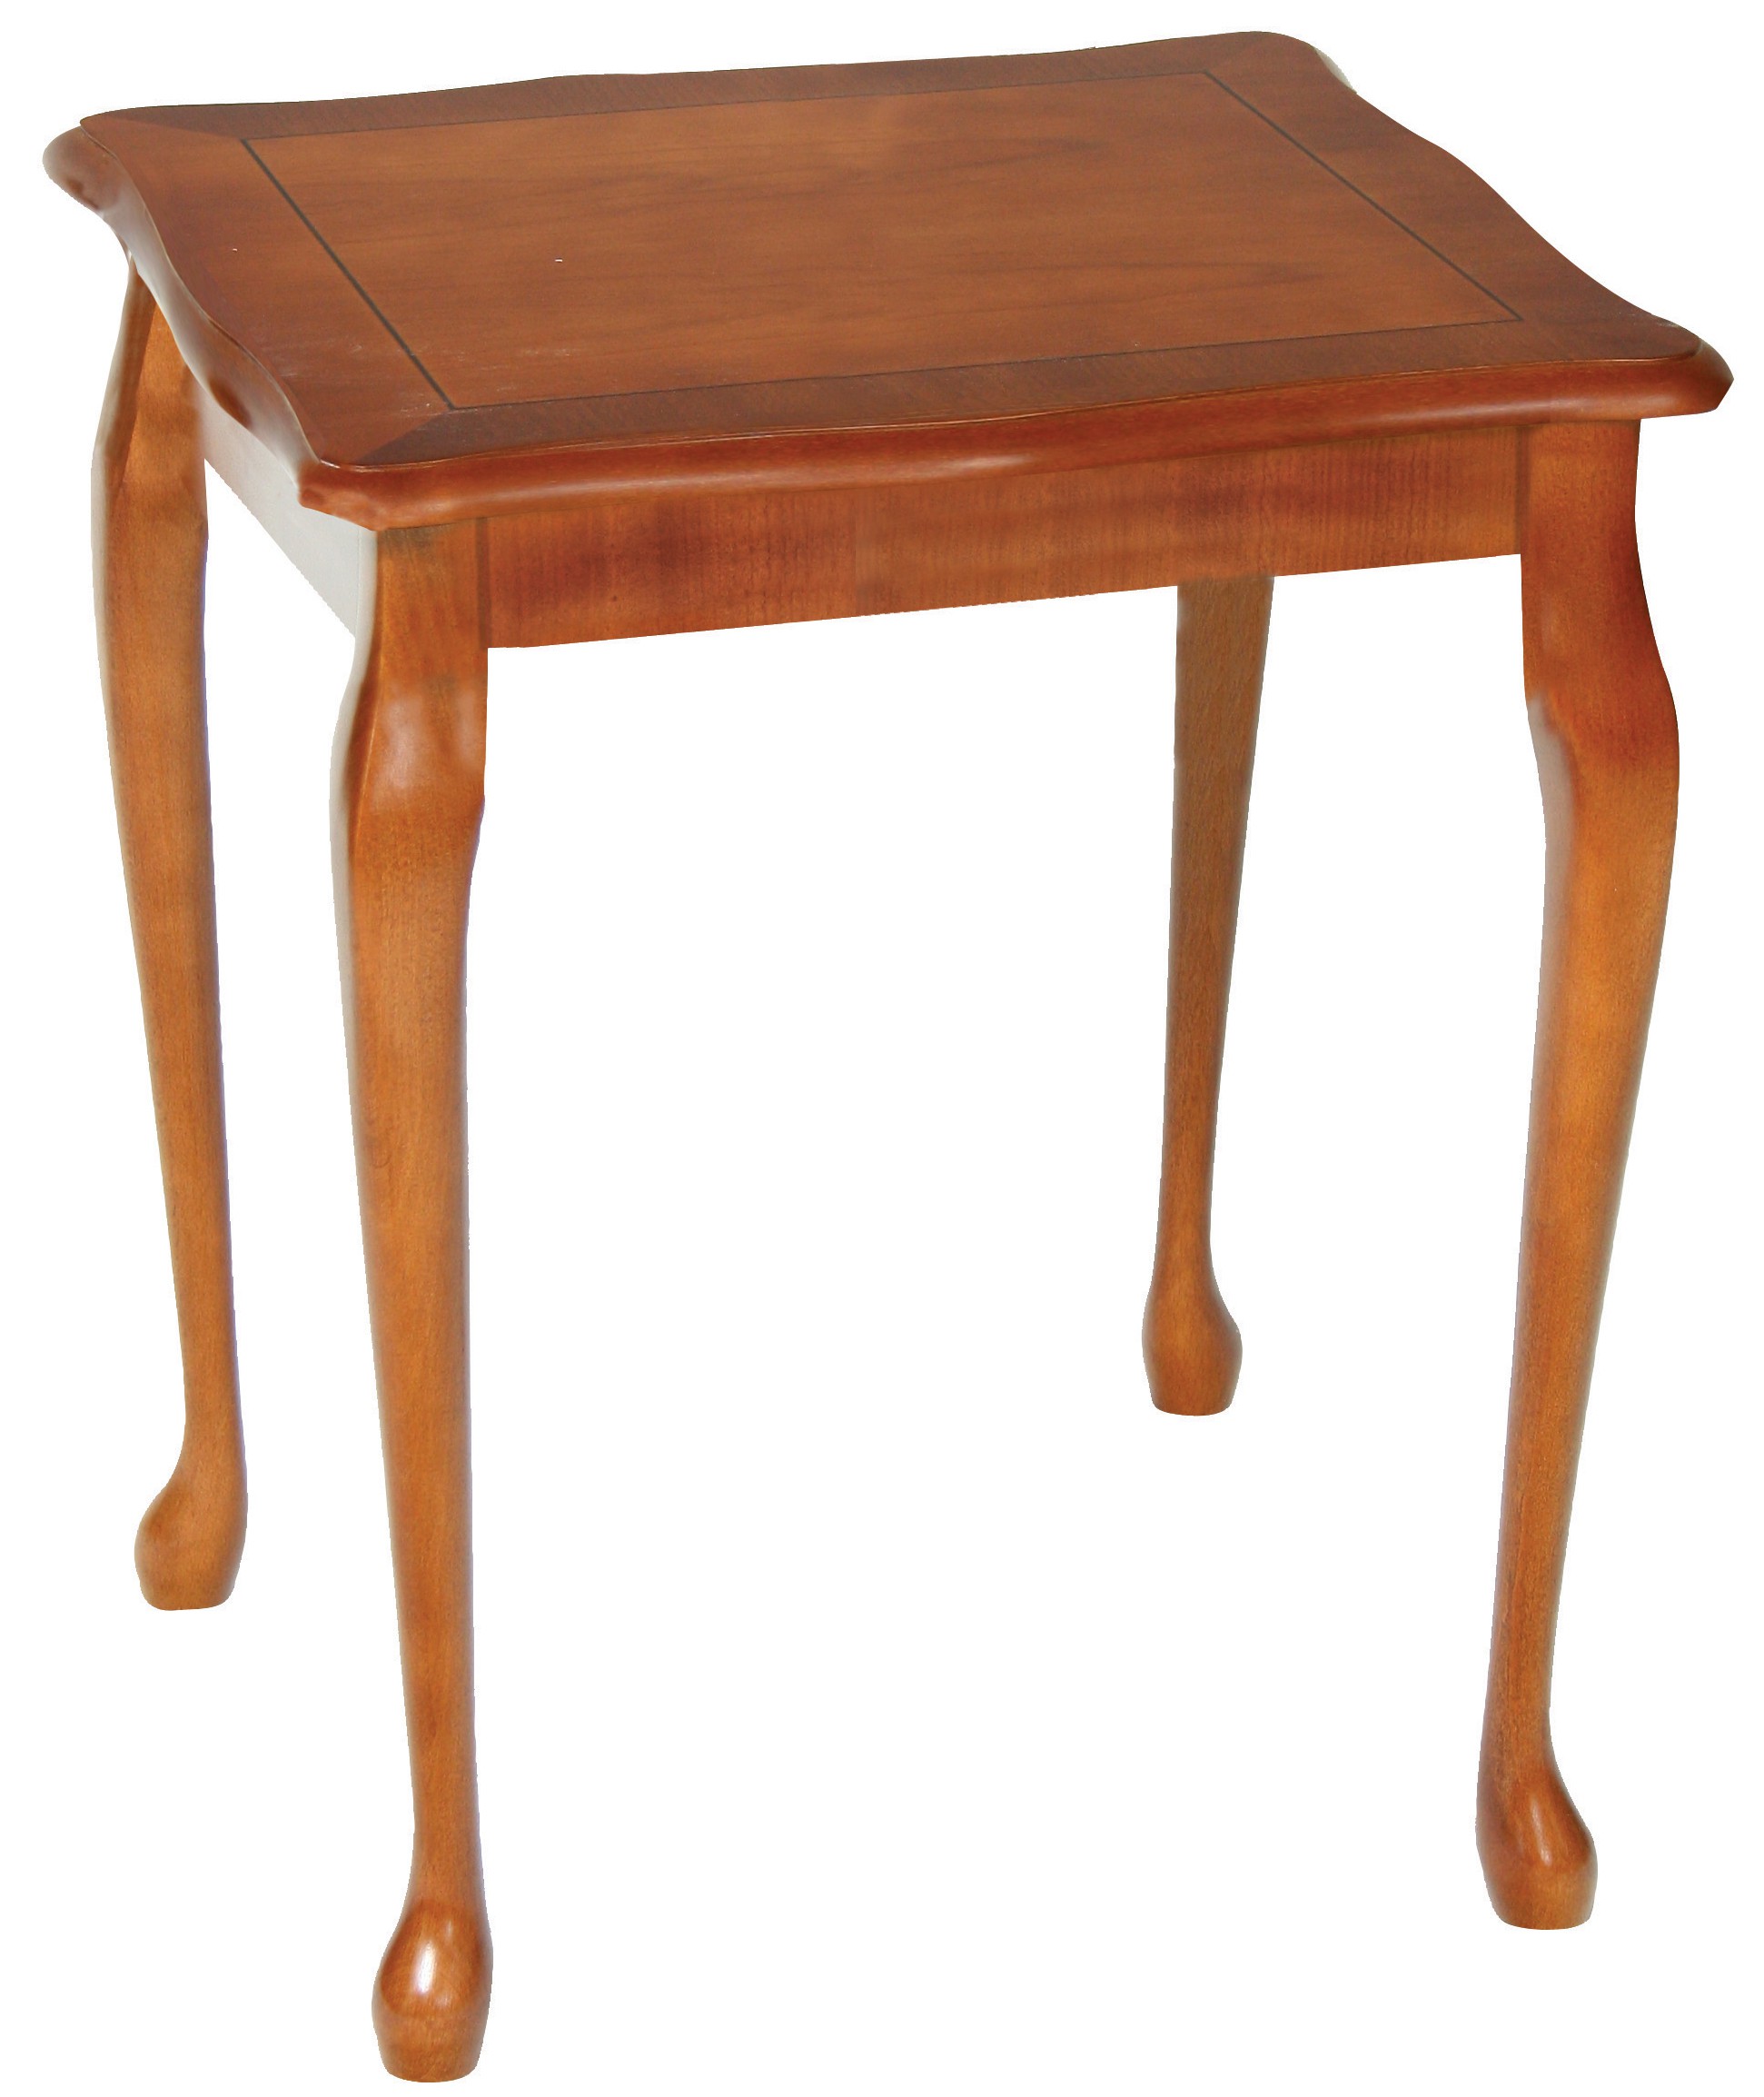 Queen Anne Small Lamp Table, Tiny Lamp Table